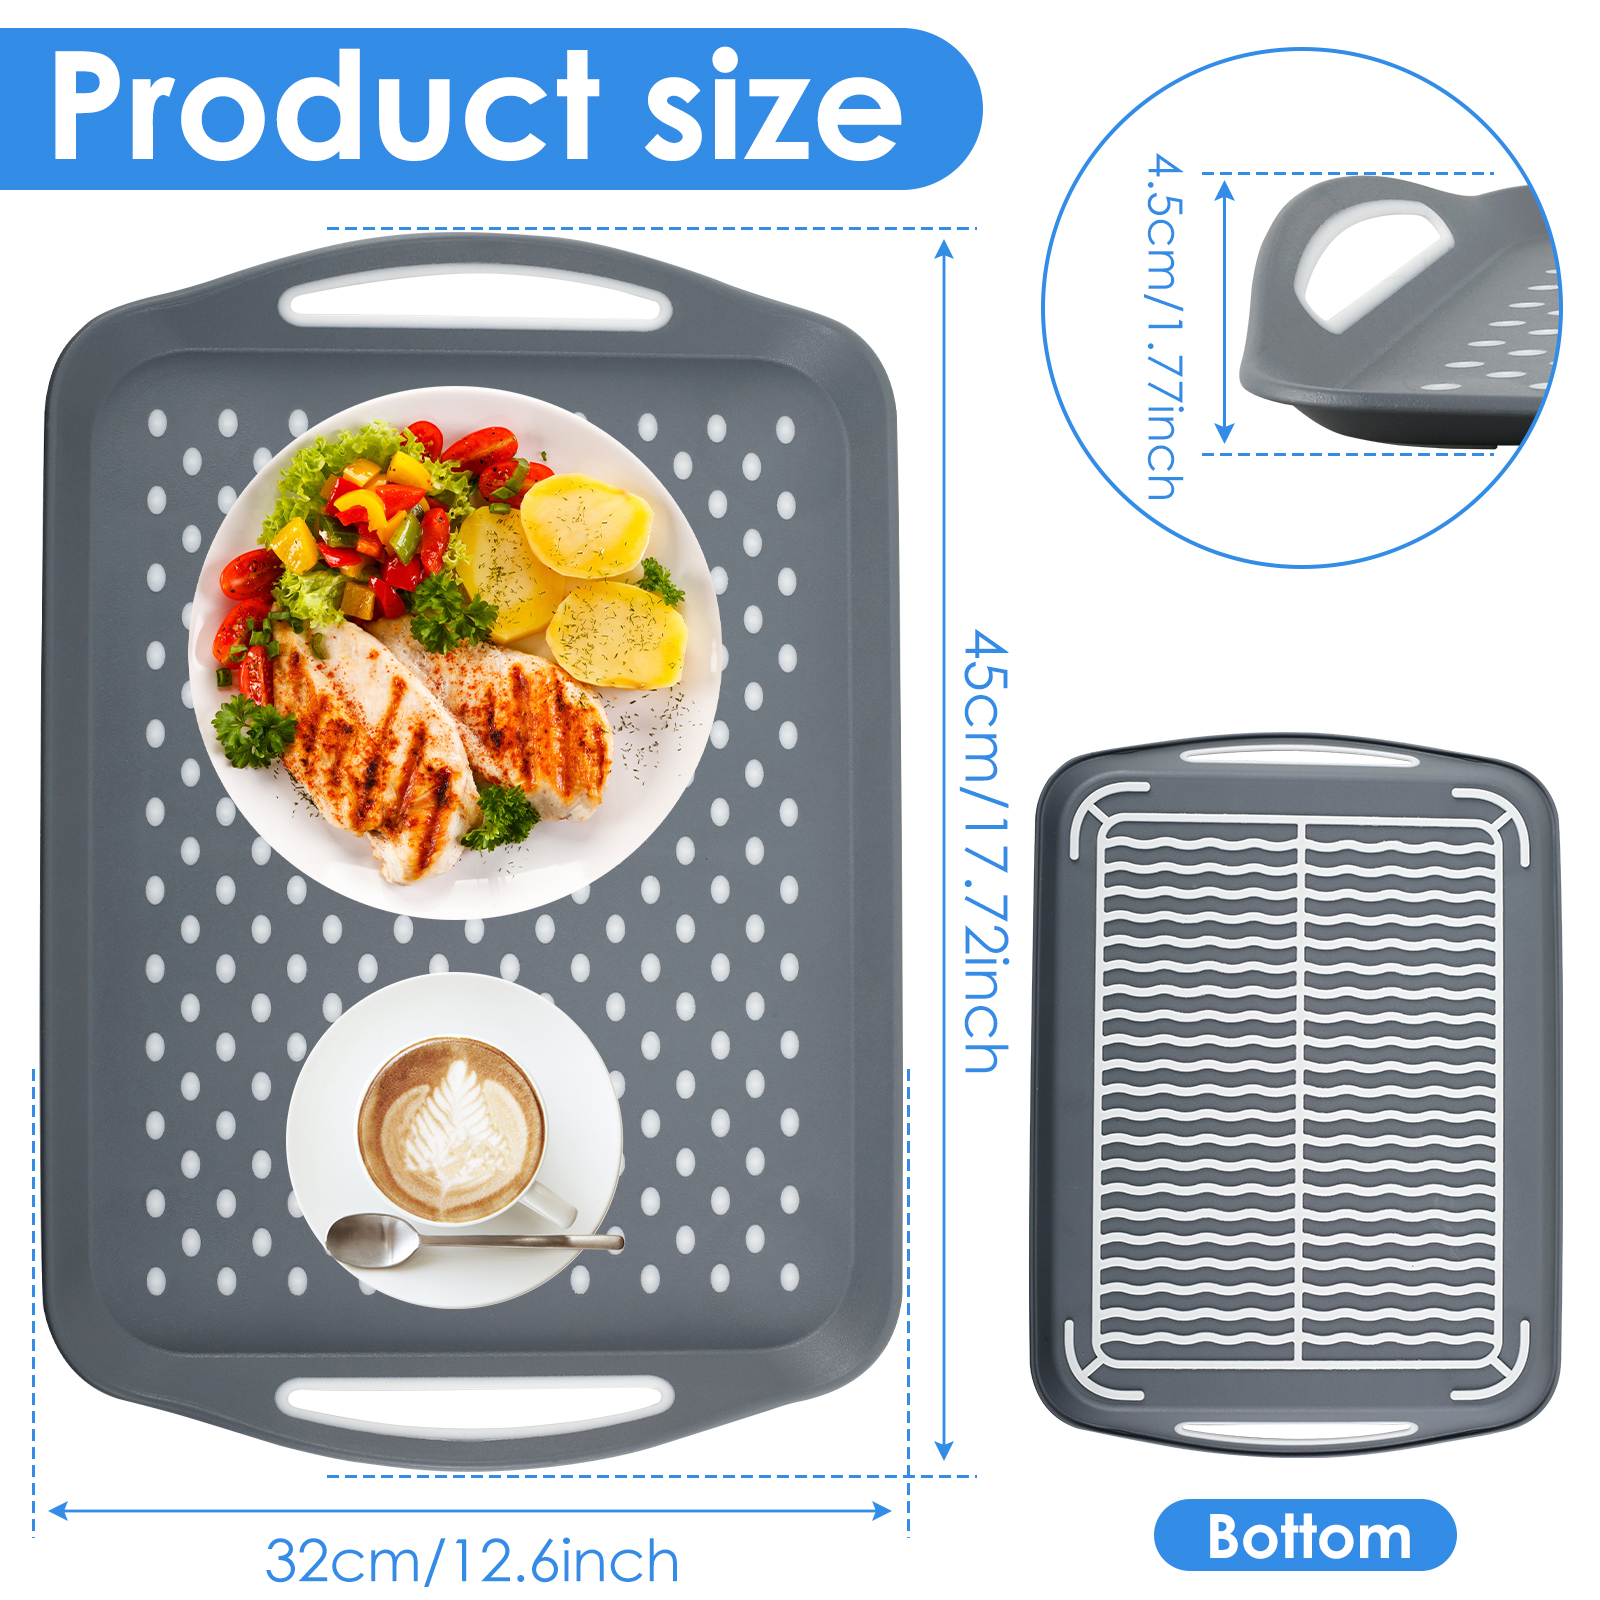 Large Nonslip Serving Tray with Handles, Silicone Grippy Dots Food Trays for Eating, Dishwasher Safe Lap Trays for Breakfast Dinner Snack Fruit